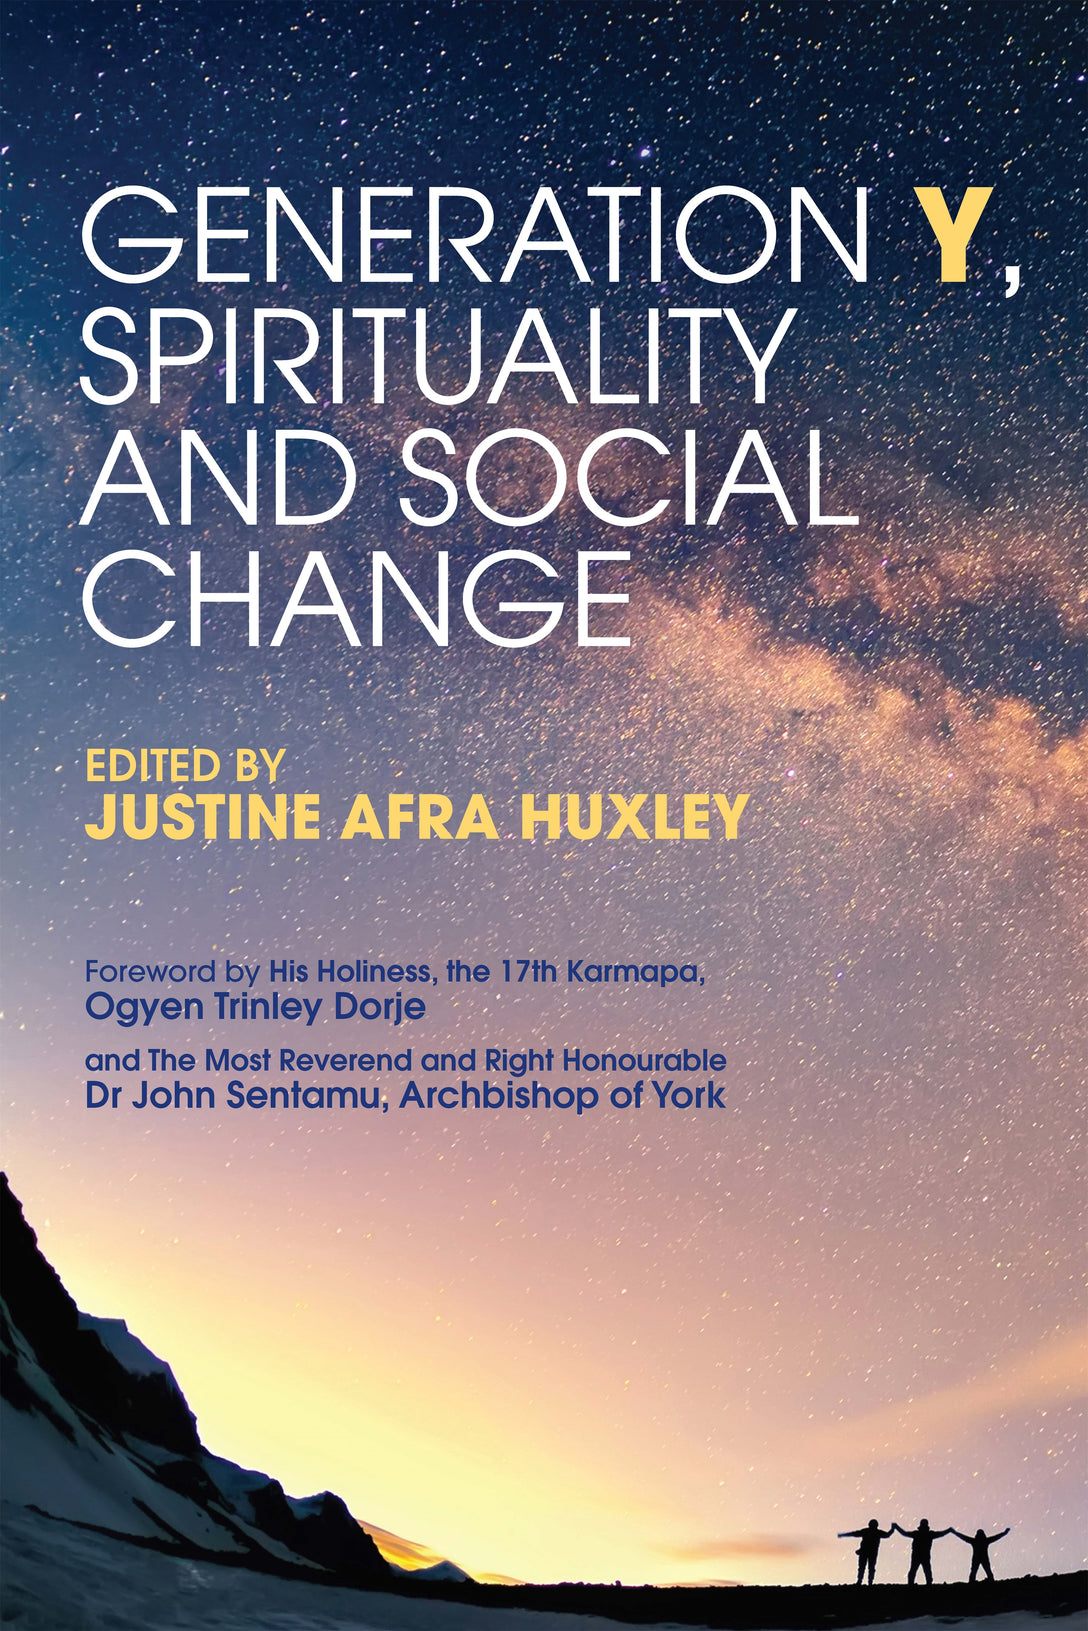 Generation Y, Spirituality and Social Change by Justine Afra Huxley, No Author Listed